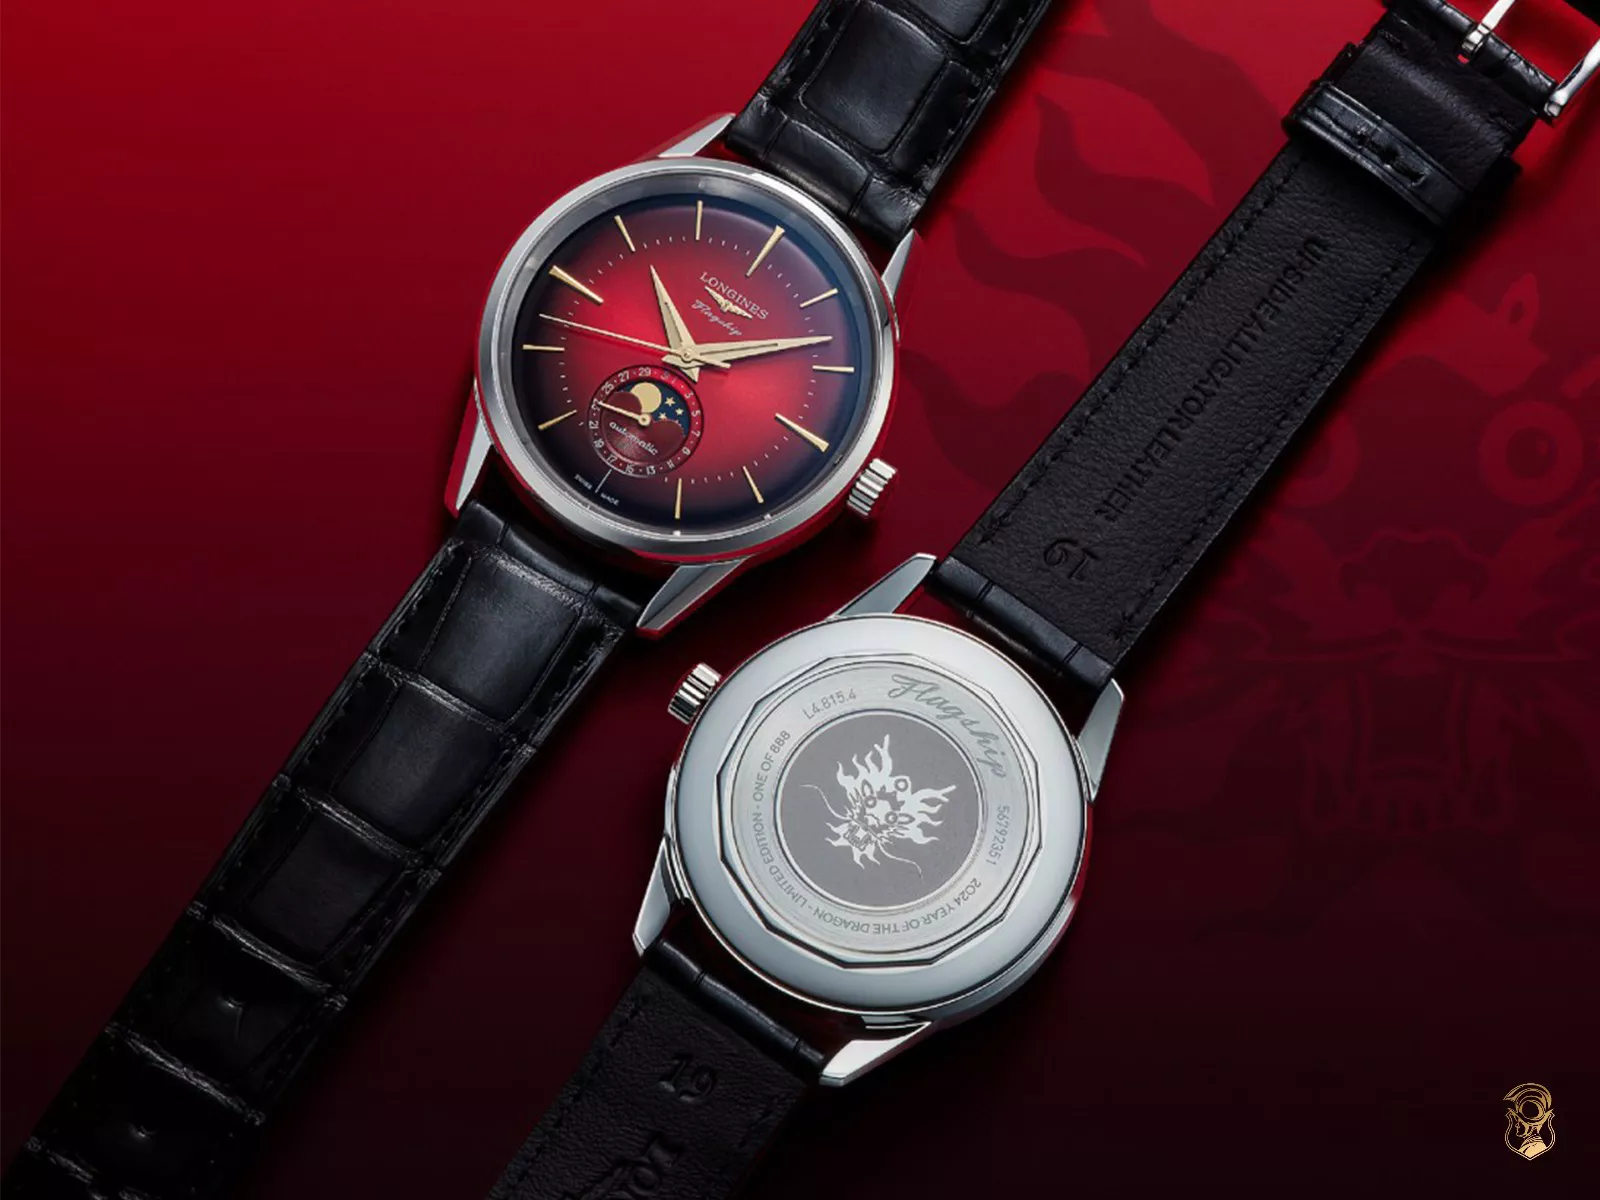 Longines Flagship Heritage Year Of The Dragon Watch 38.50MM